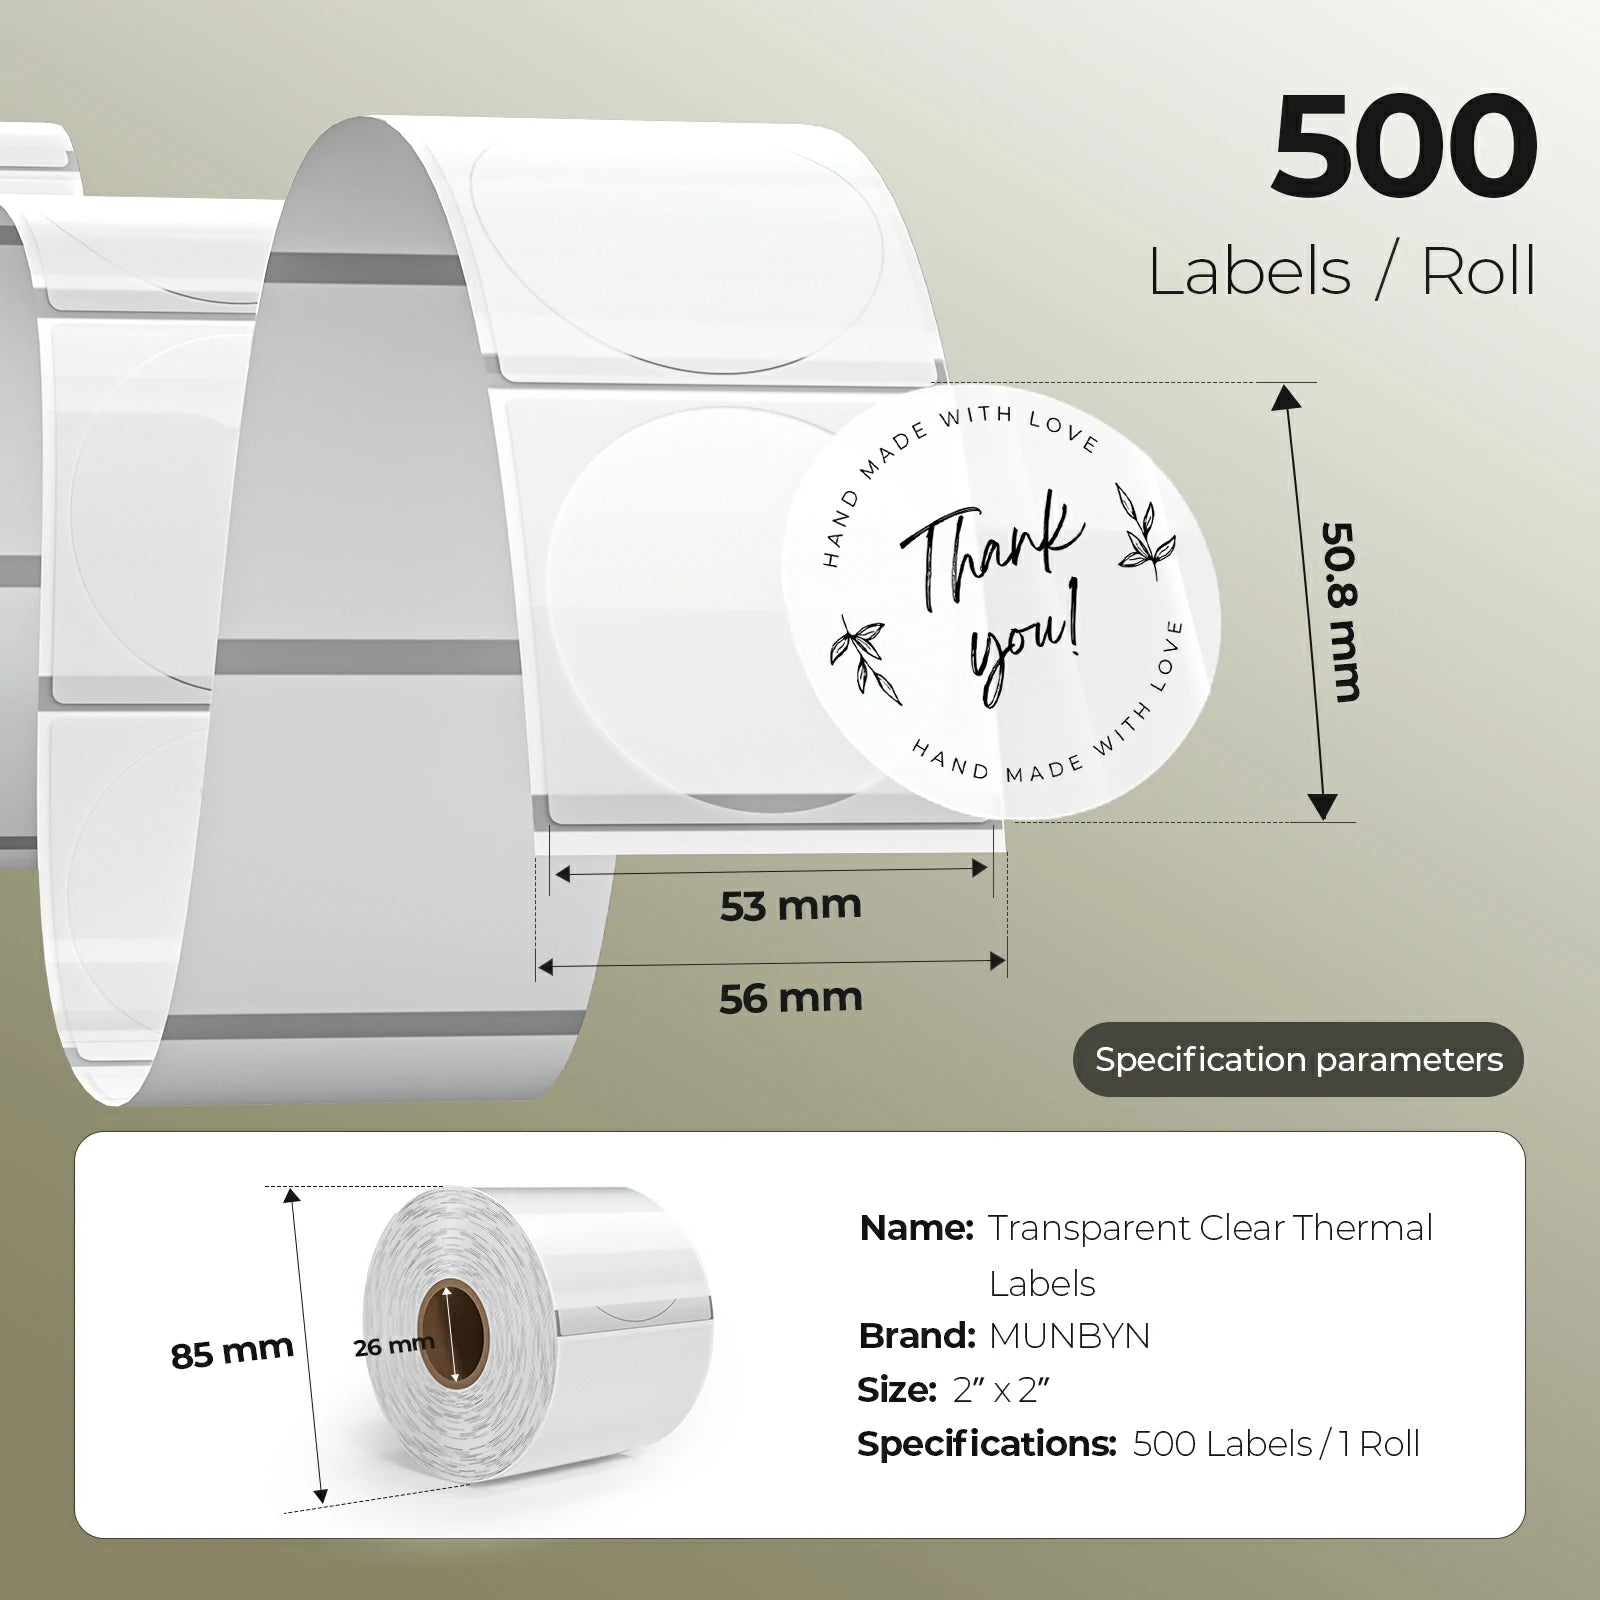 MUNBYN transparent round thermal labels have 500 labels per roll.